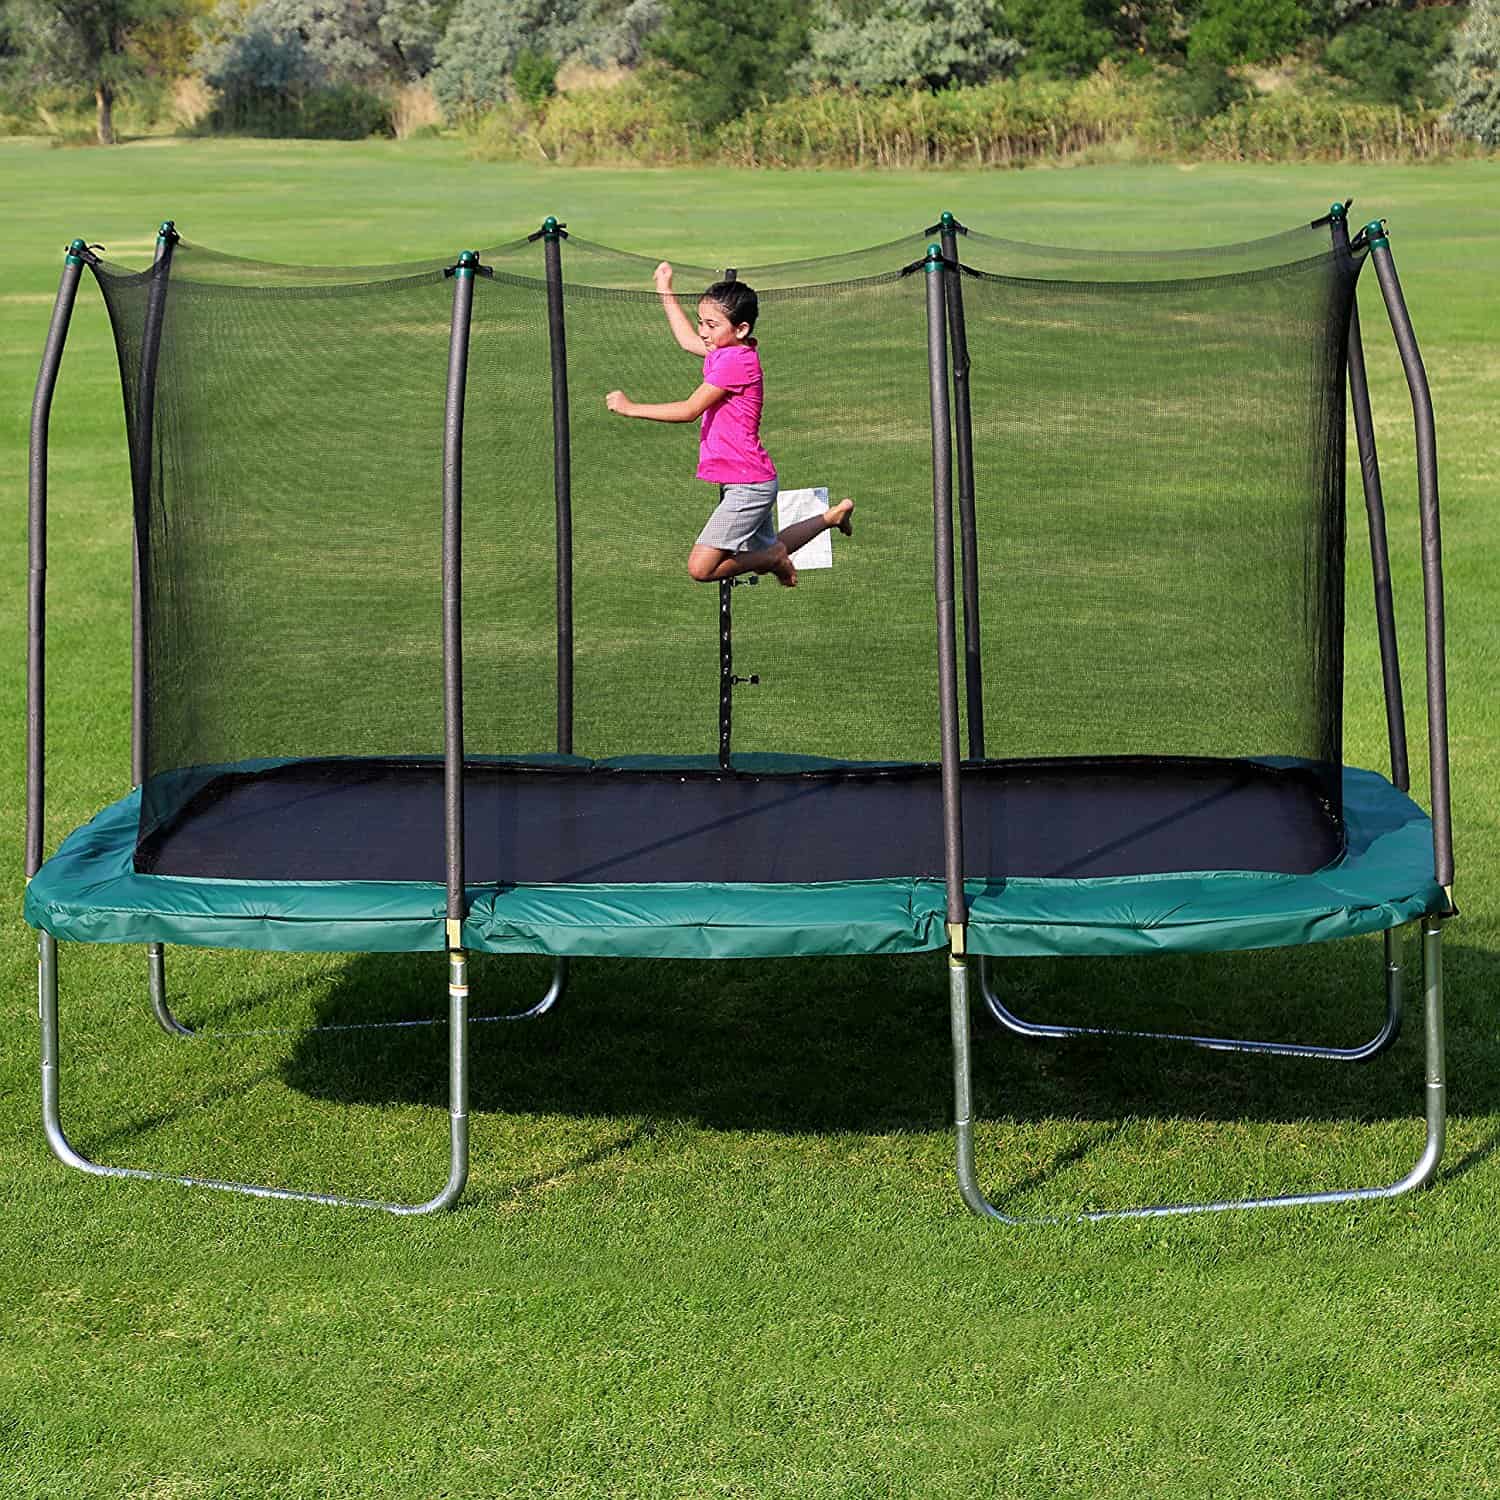 How To Make Your Trampoline More Bouncy